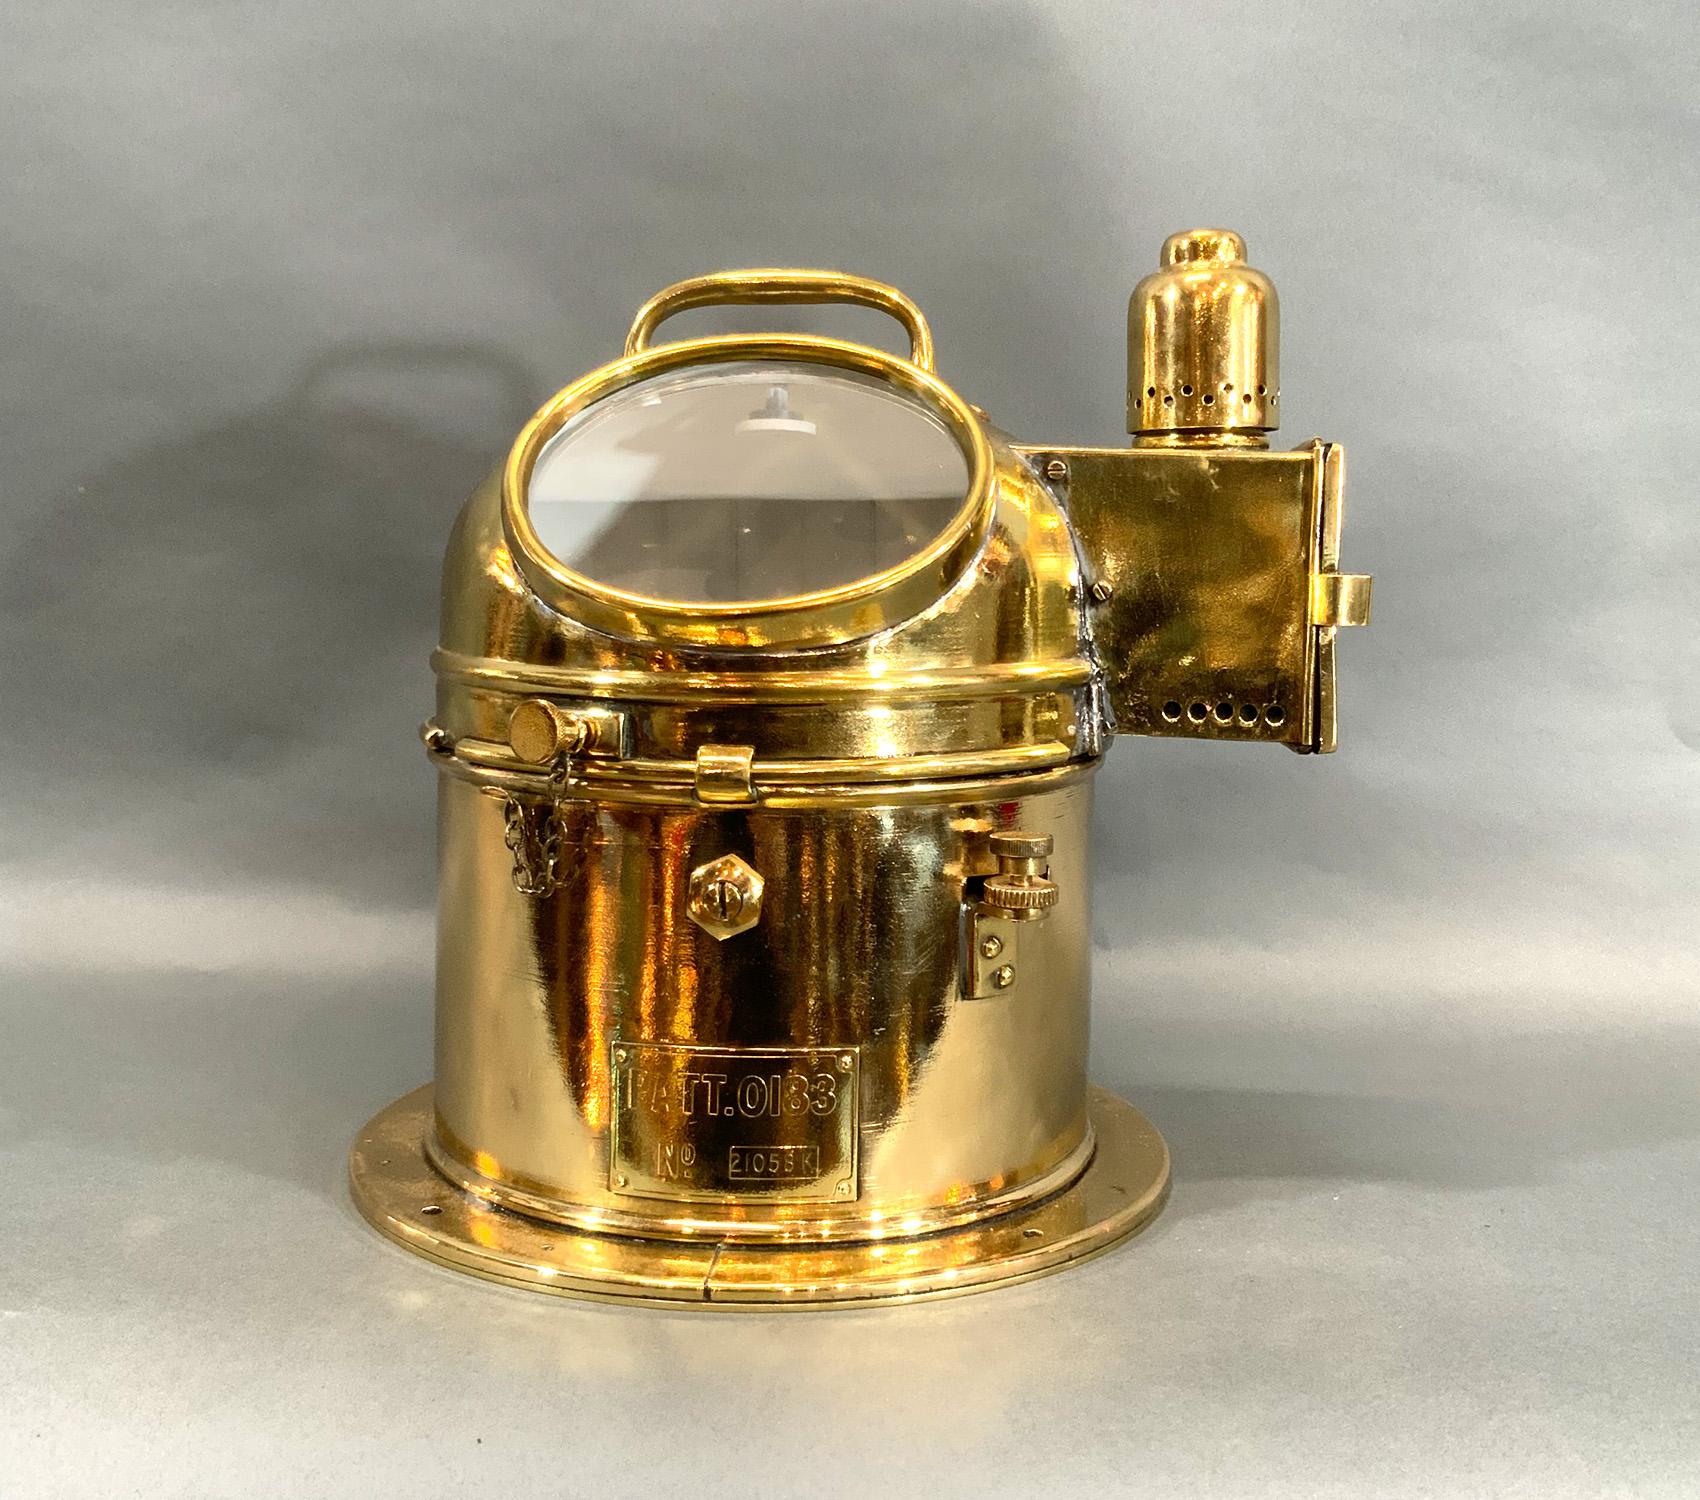 Binnacle compass from a British Royal Navy Ship with engraved brass plate marked “PATT. 0183, No. 21058K”. Brass base and hood, sidelight, gimballed compass, oil burner, matching compass in very good order and also polished and lacquered.

Weight: